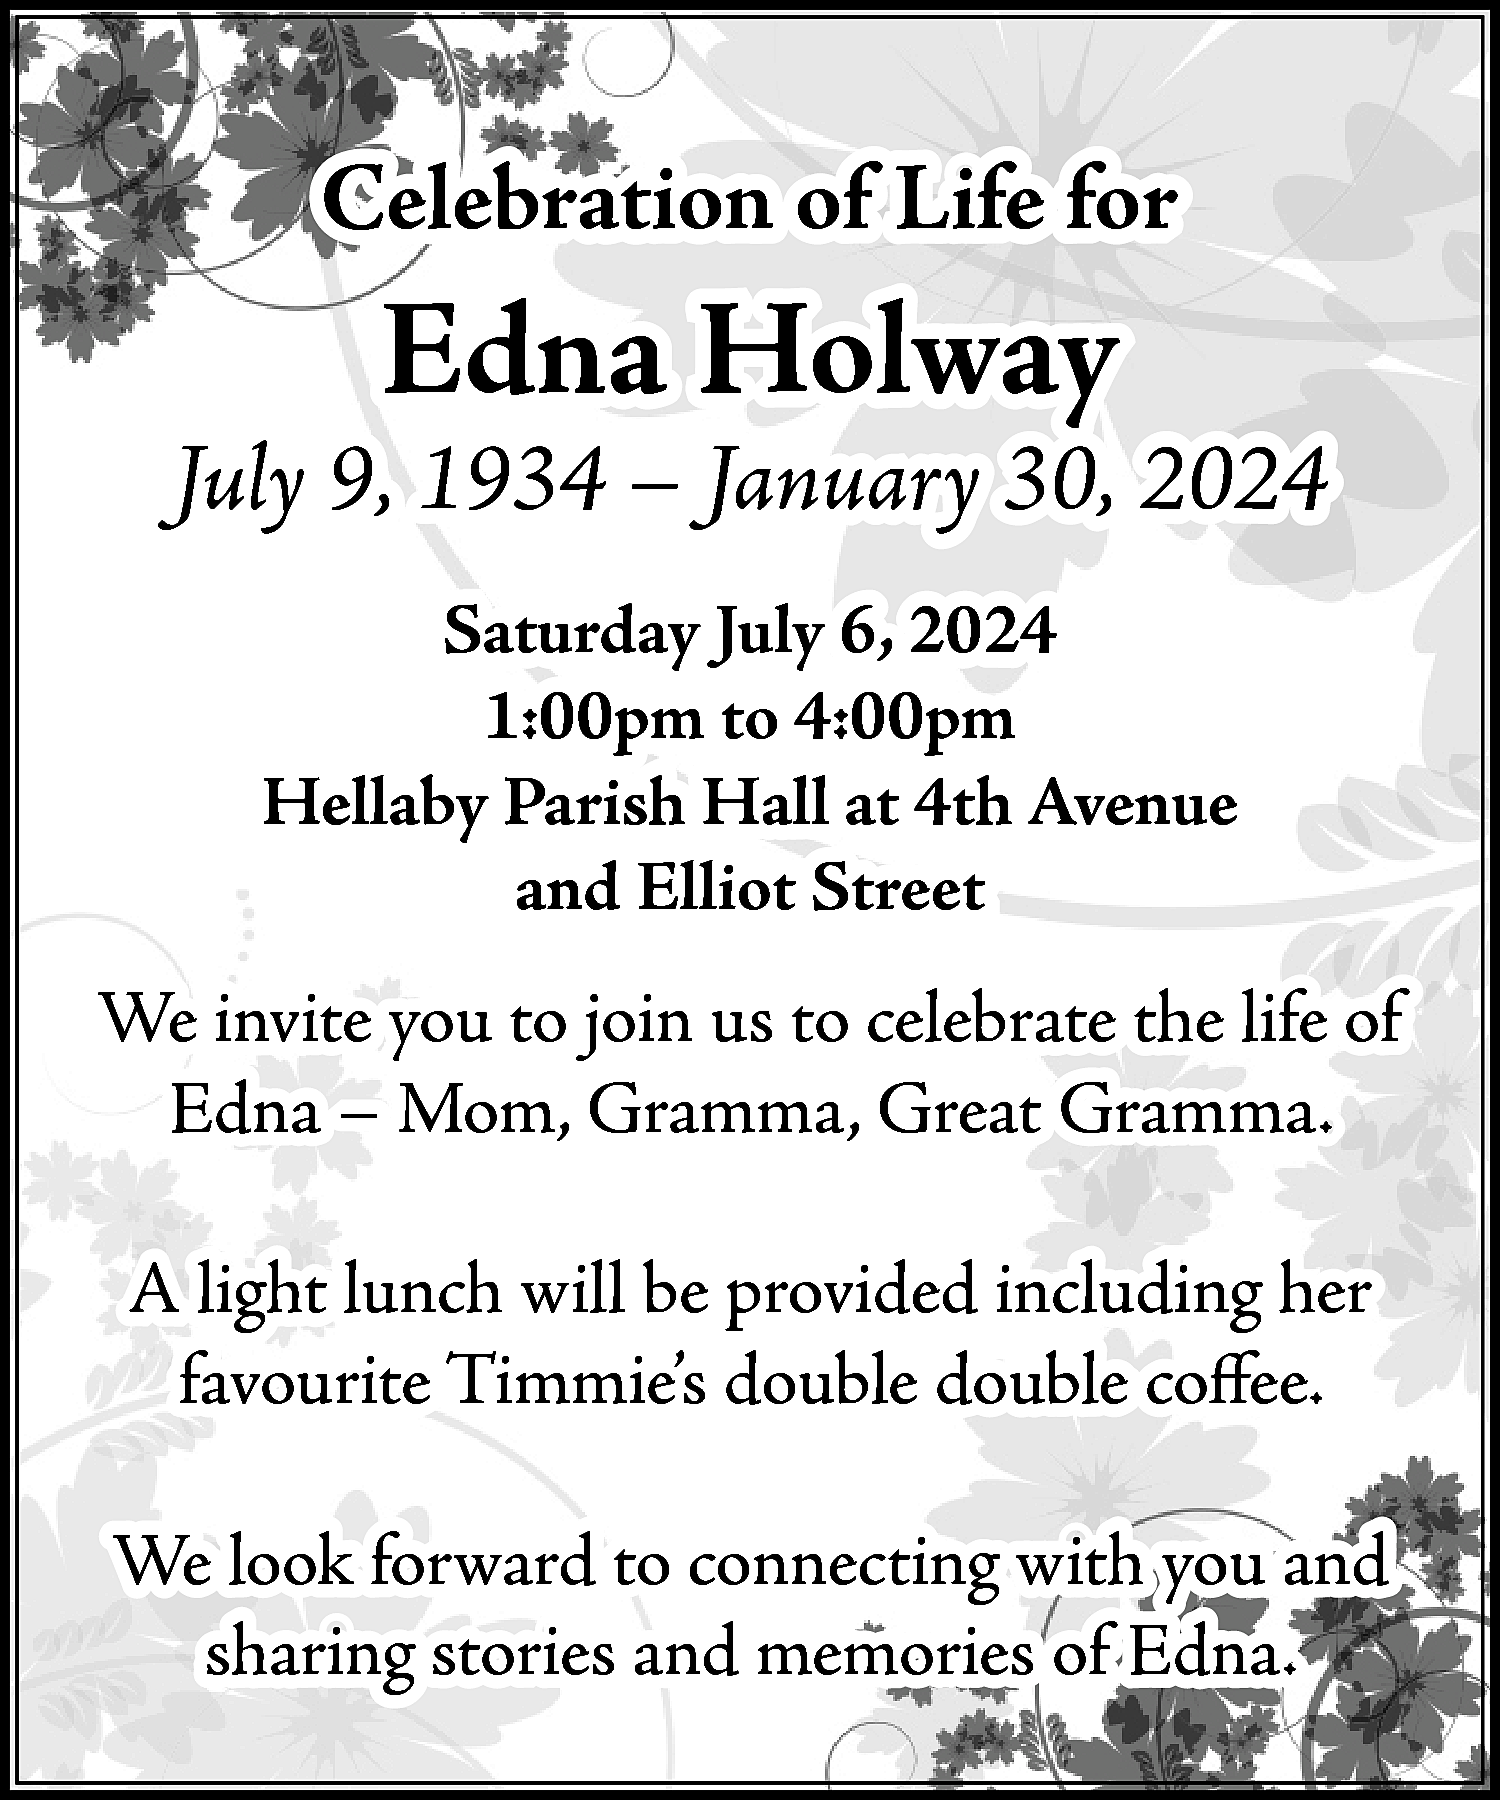 Celebration of Life for <br>  Celebration of Life for    Edna Holway    July 9, 1934 – January 30, 2024  Saturday July 6, 2024  1:00pm to 4:00pm  Hellaby Parish Hall at 4th Avenue  and Elliot Street    We invite you to join us to celebrate the life of  Edna – Mom, Gramma, Great Gramma.  A light lunch will be provided including her  favourite Timmie’s double double coffee.  We look forward to connecting with you and  sharing stories and memories of Edna.    